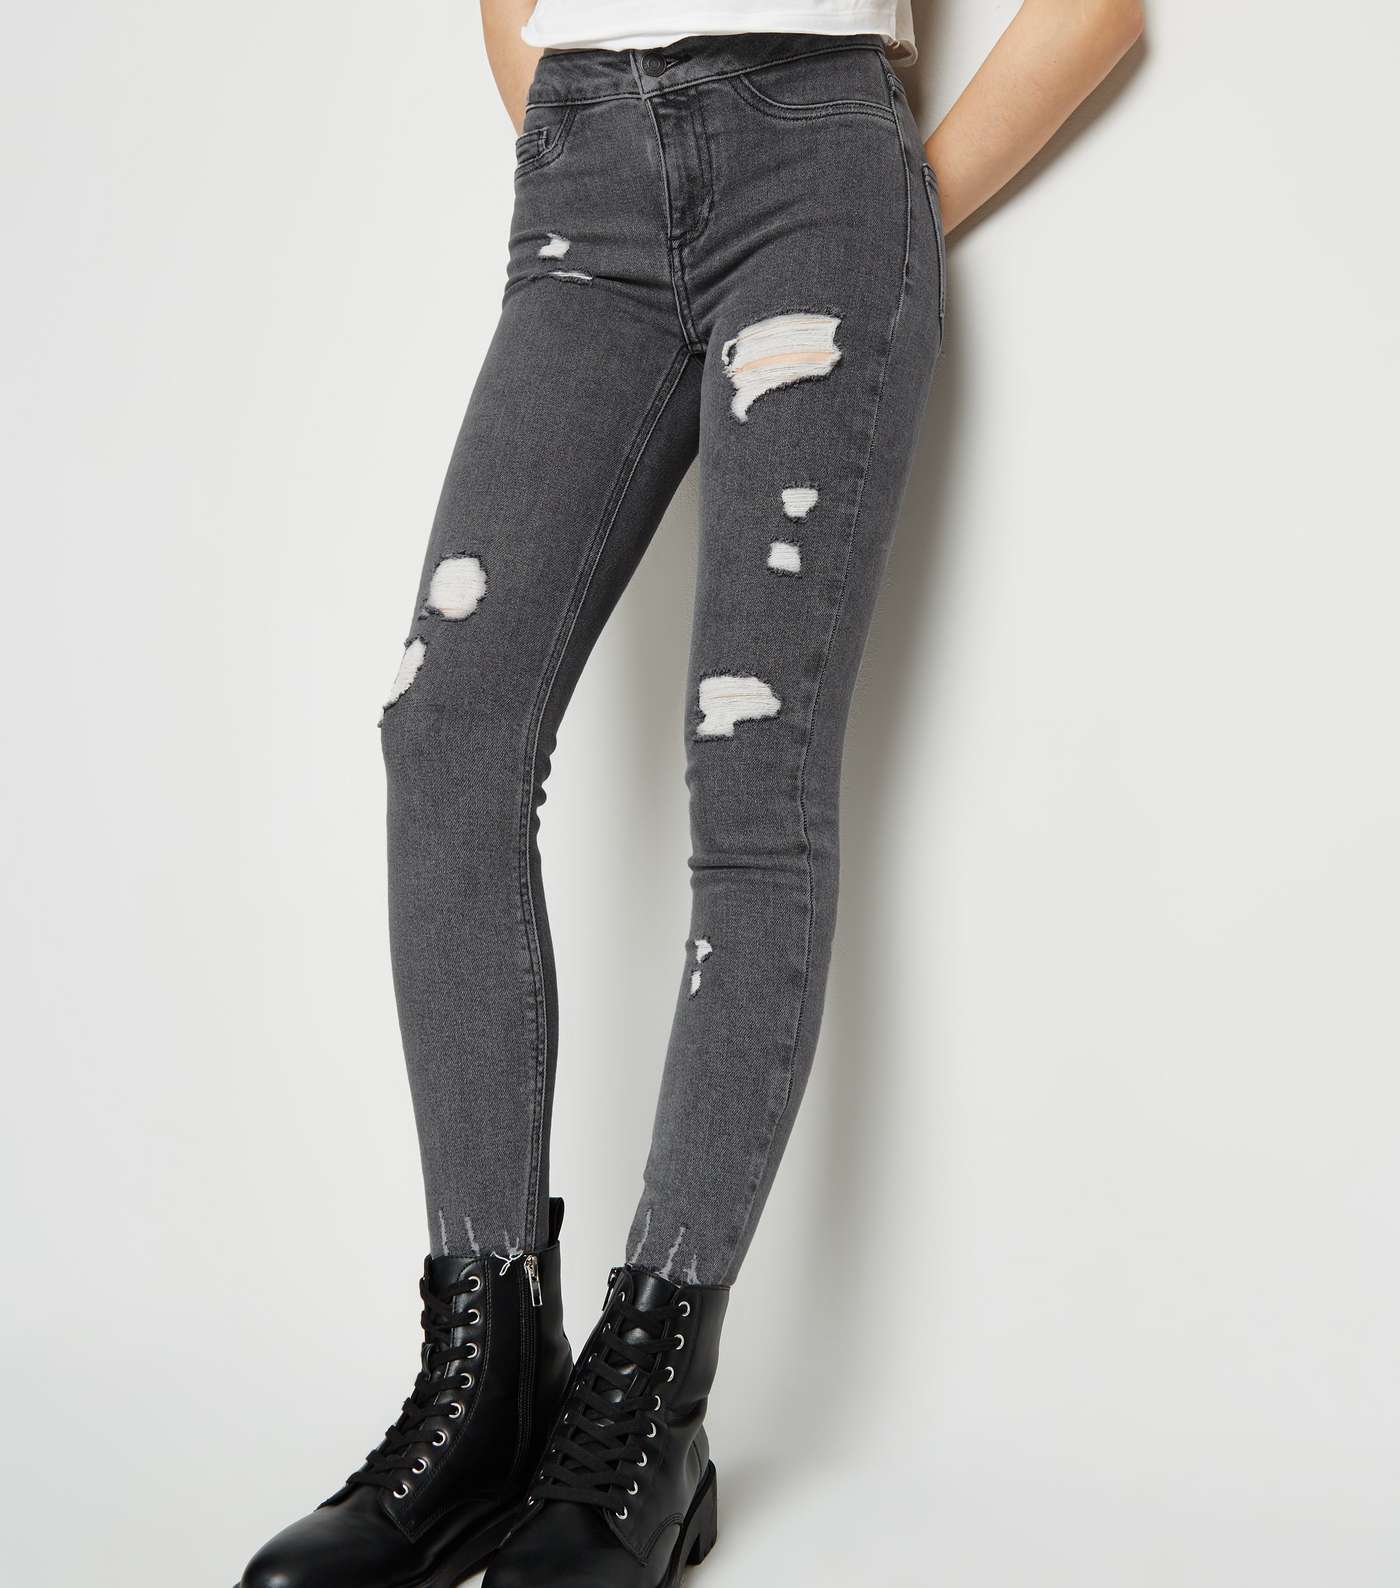 Girls Grey Ripped High Waist Super Skinny Jeans Image 5